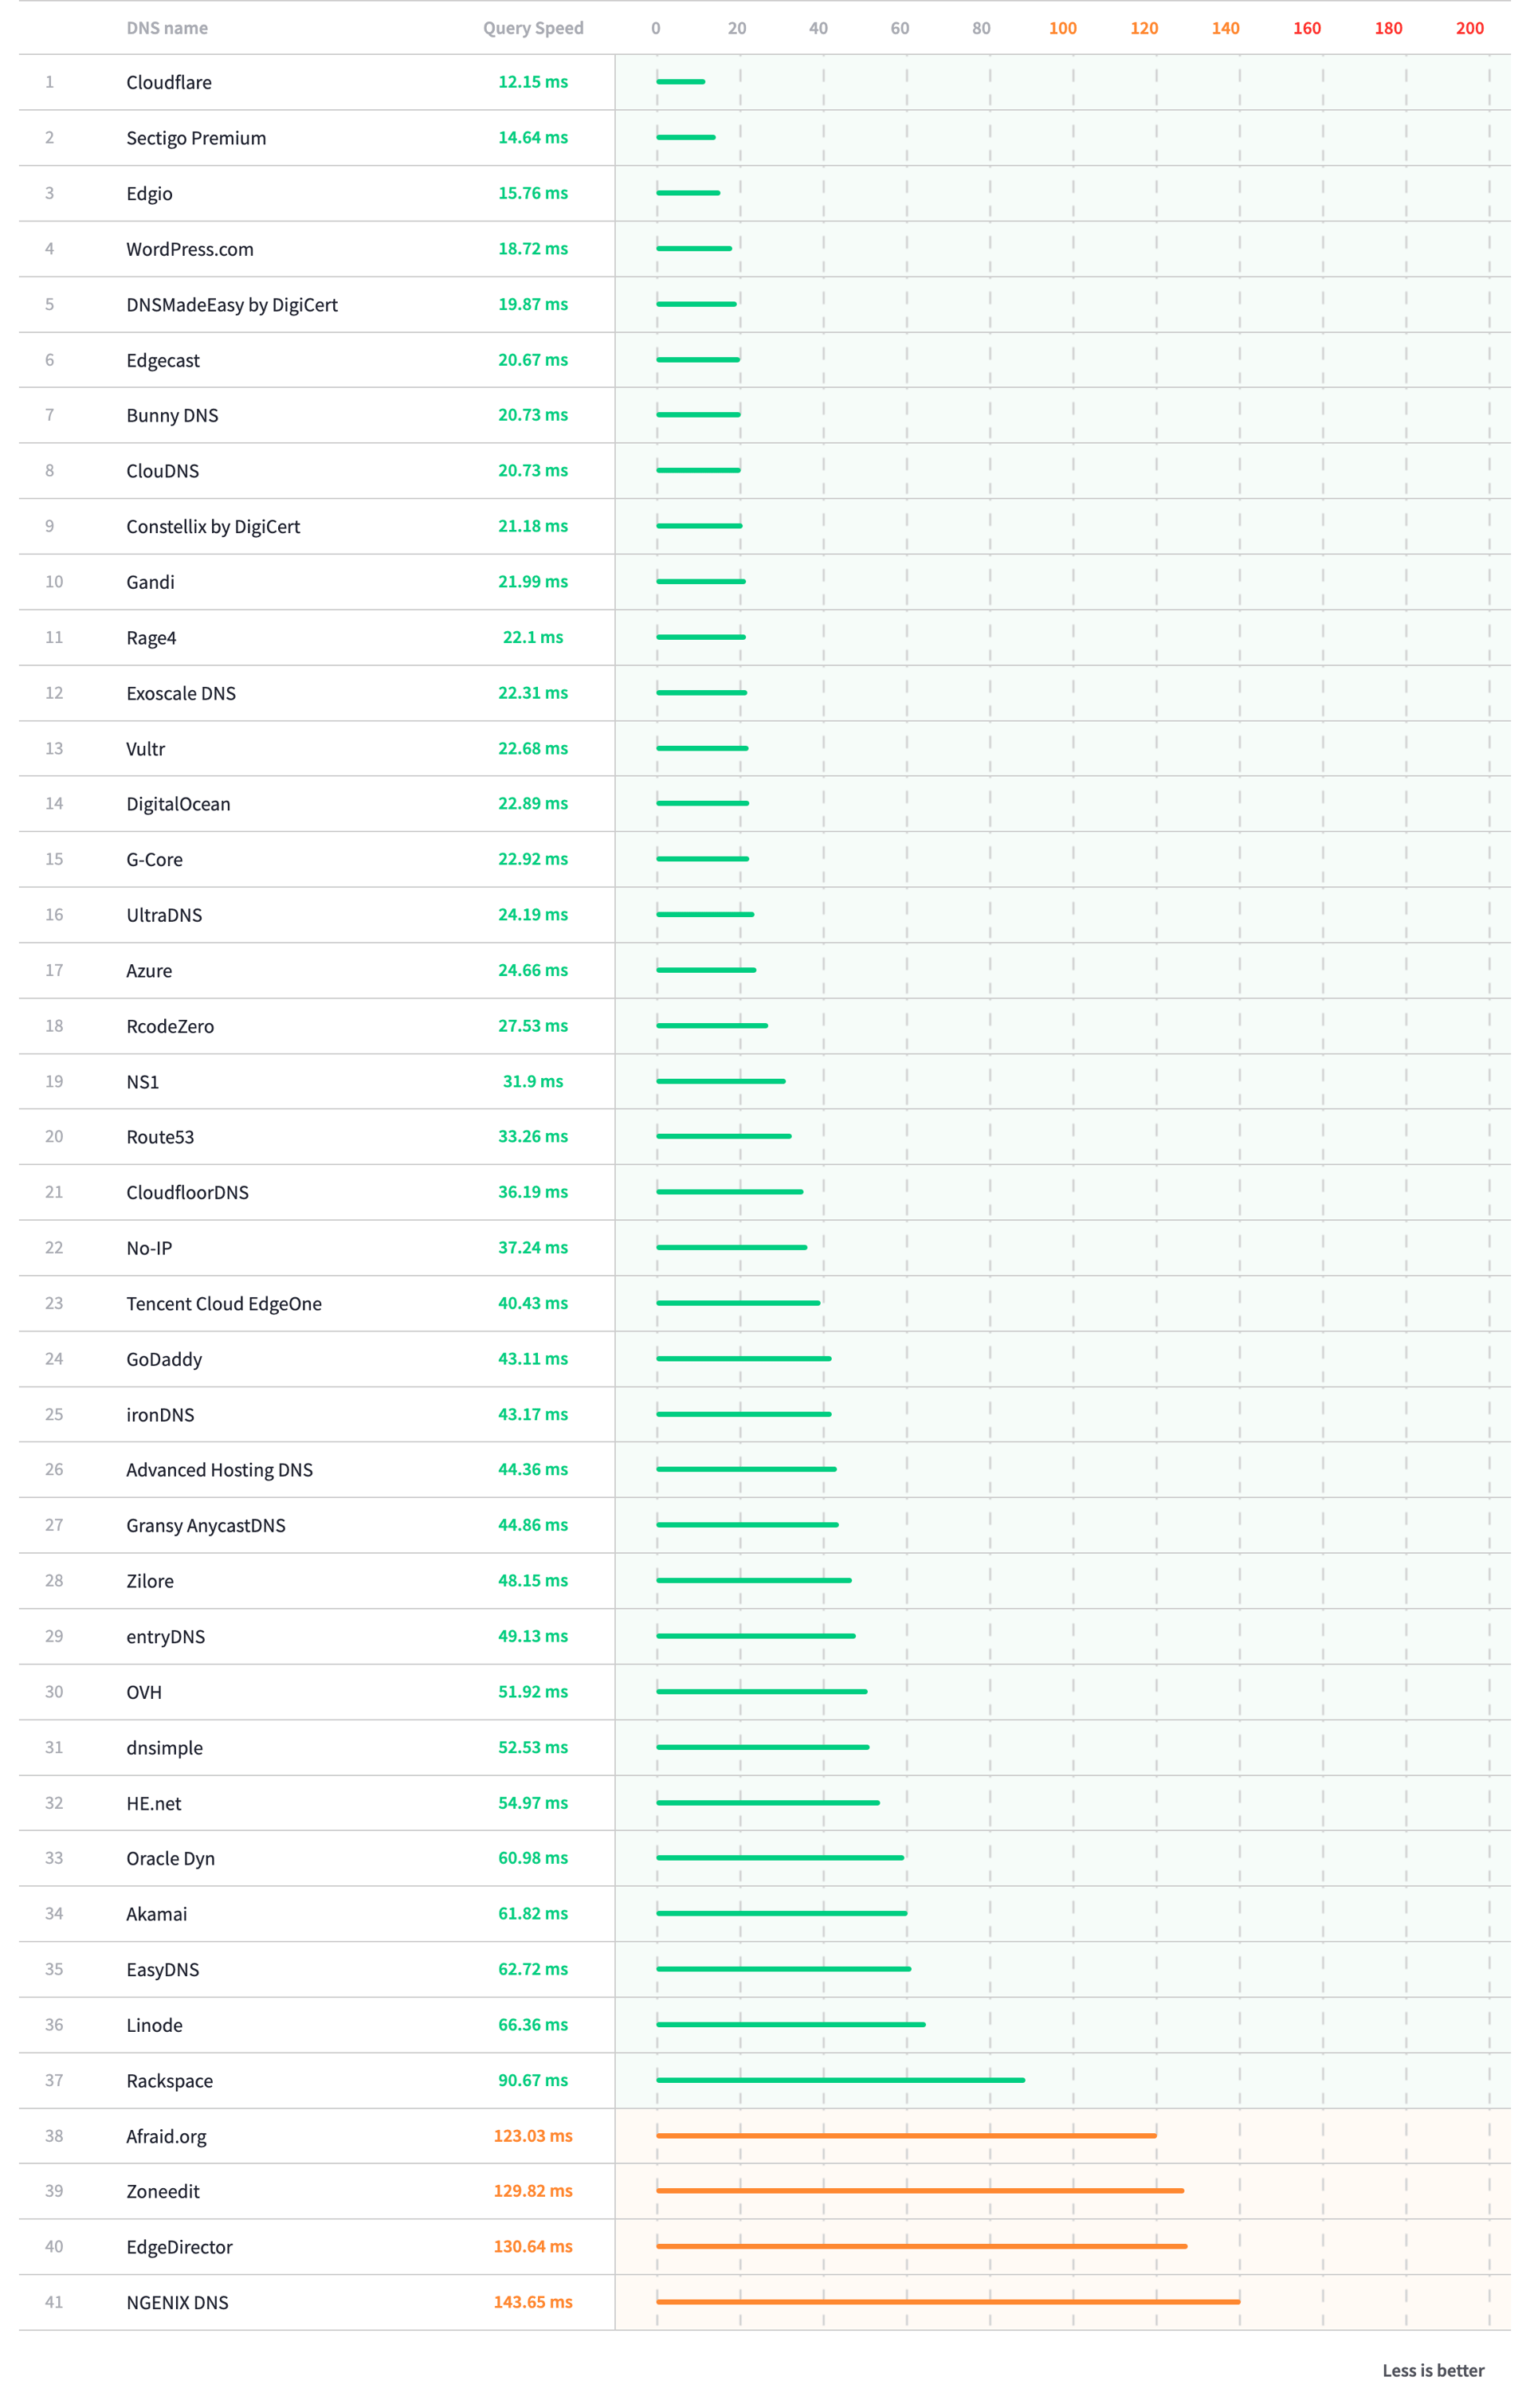 List of DNS response times with Cloudflare on top